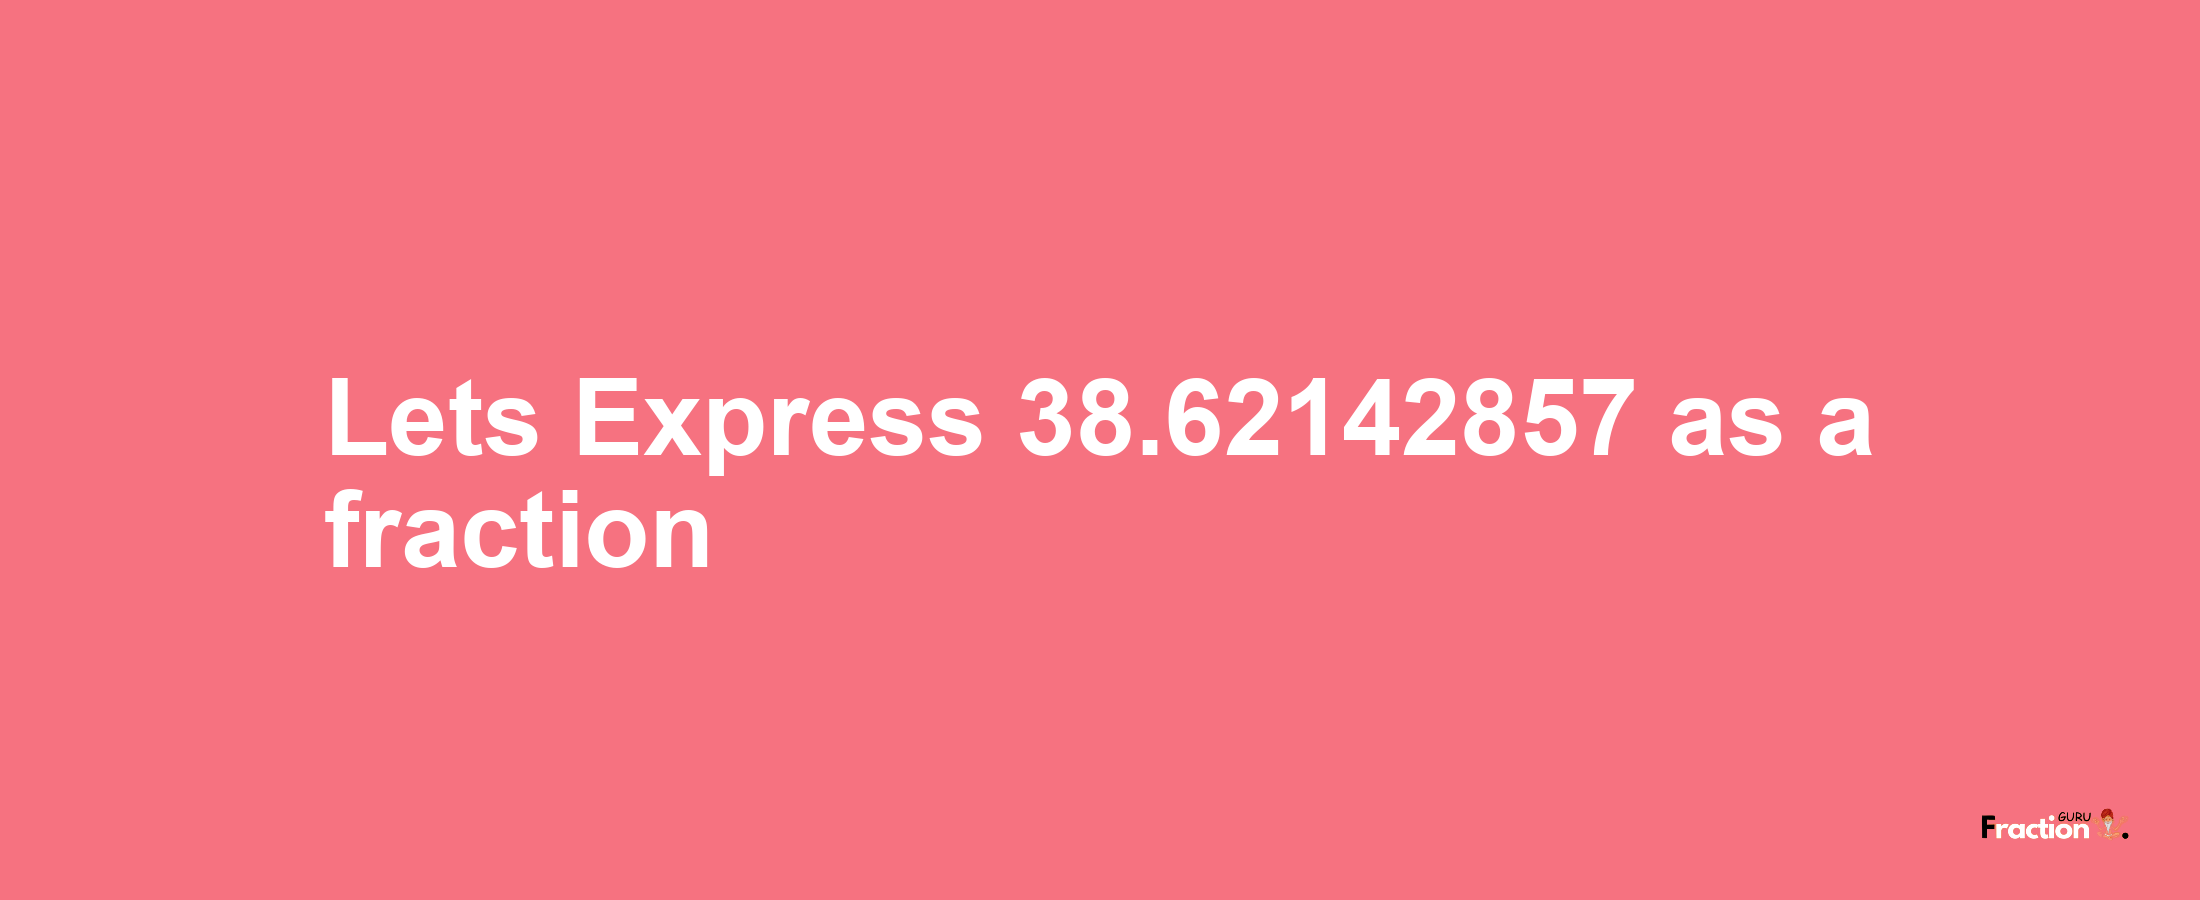 Lets Express 38.62142857 as afraction